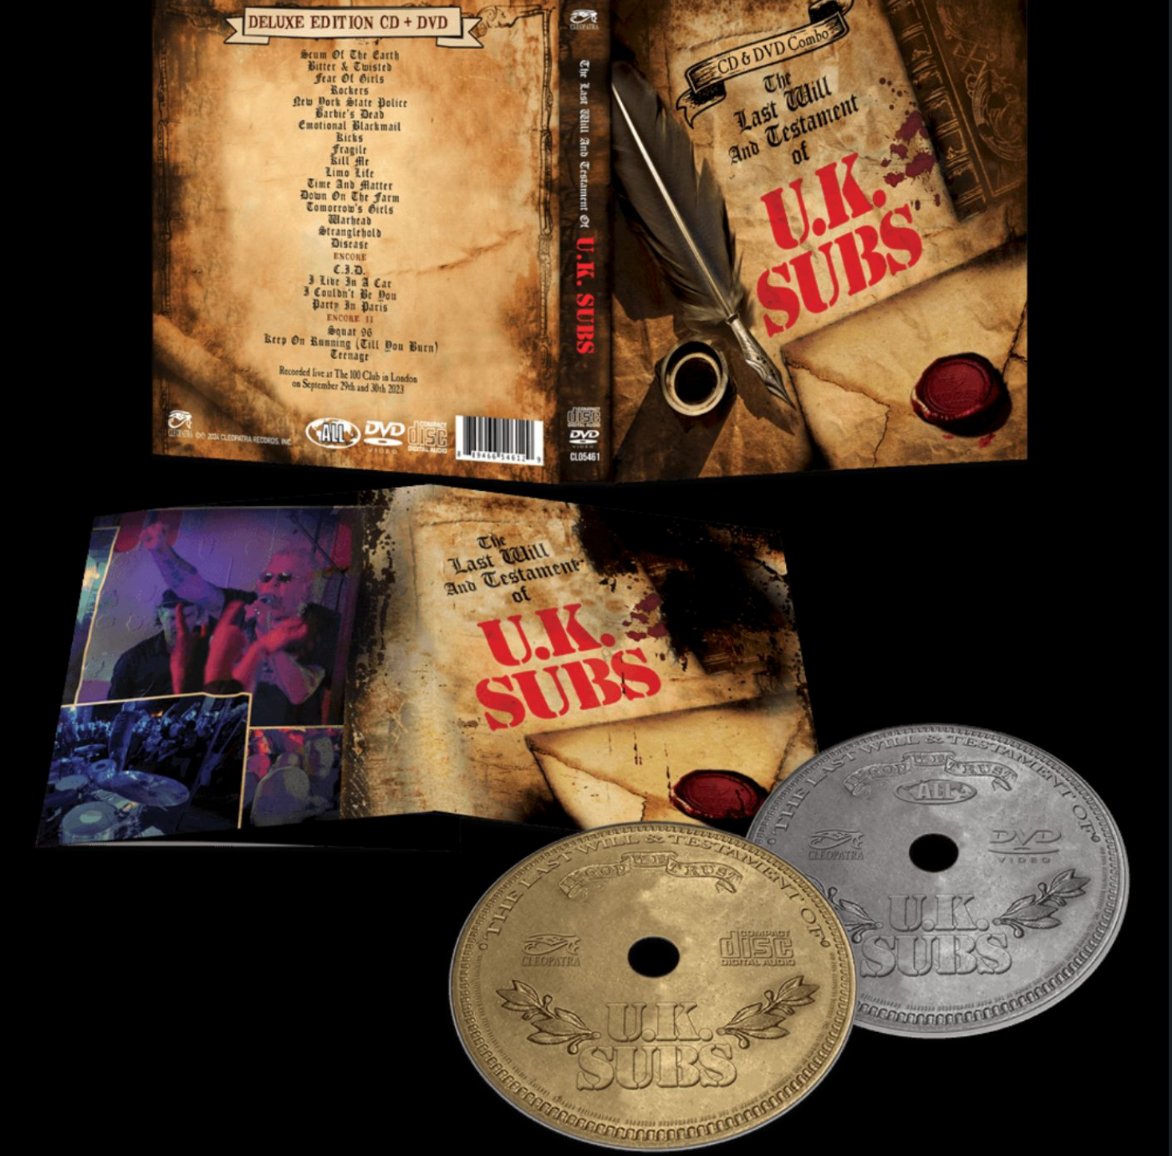 THE @UKSubs via @CleopatraRecord and @mvdentgroup 
#bluray #newreleases #uksubs #punk #music